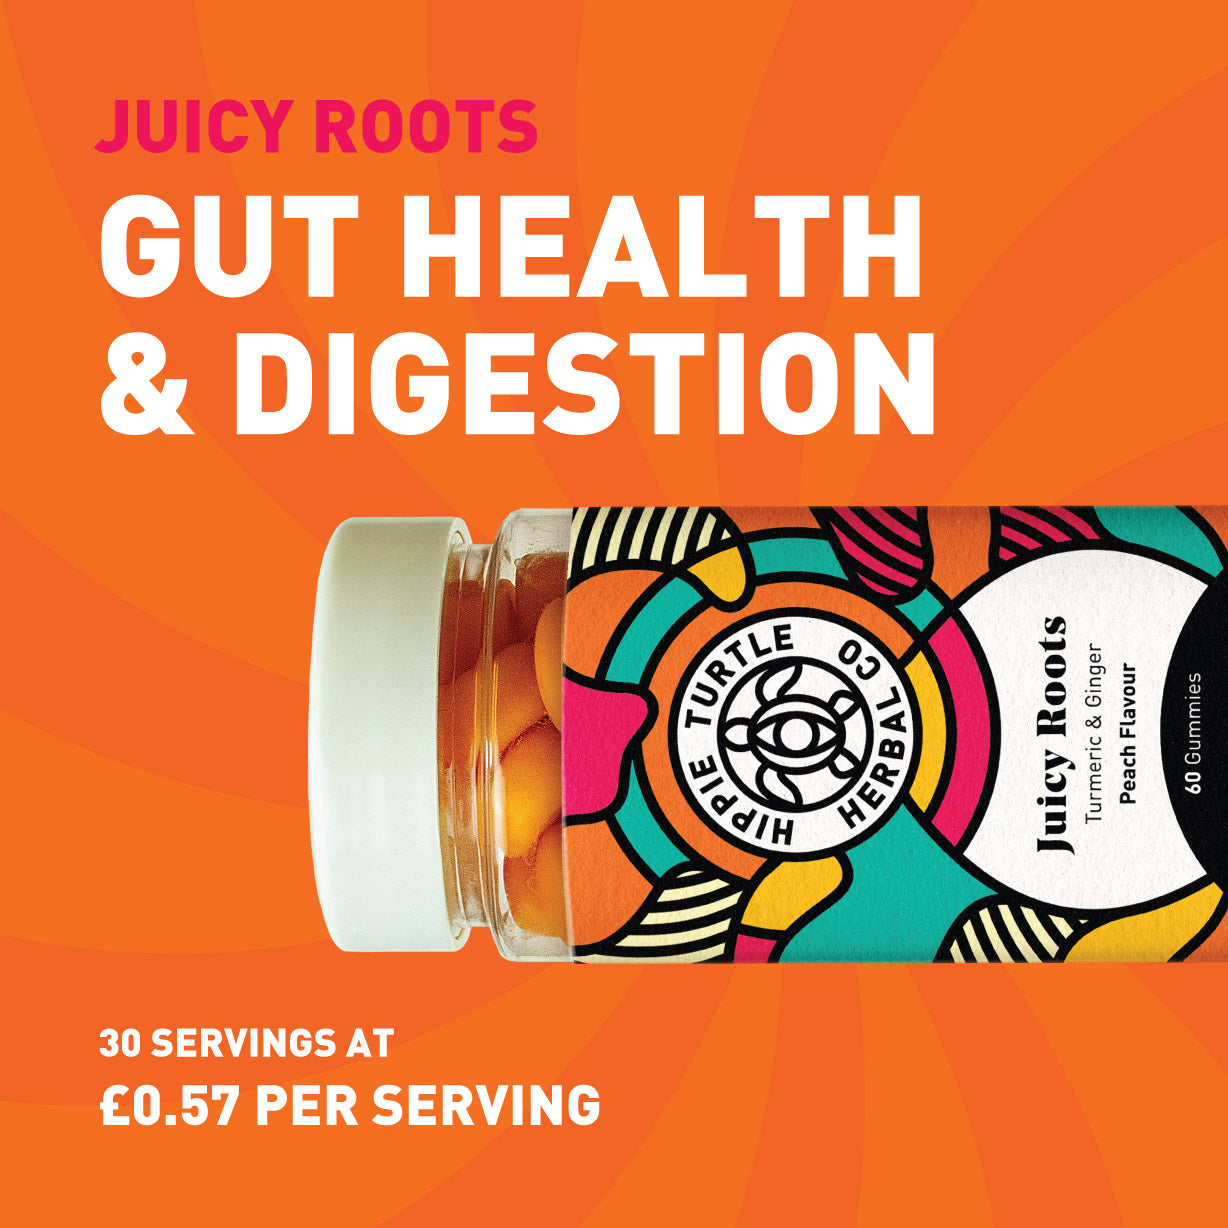 Turmeric and ginger supplement for gut health and digestion support